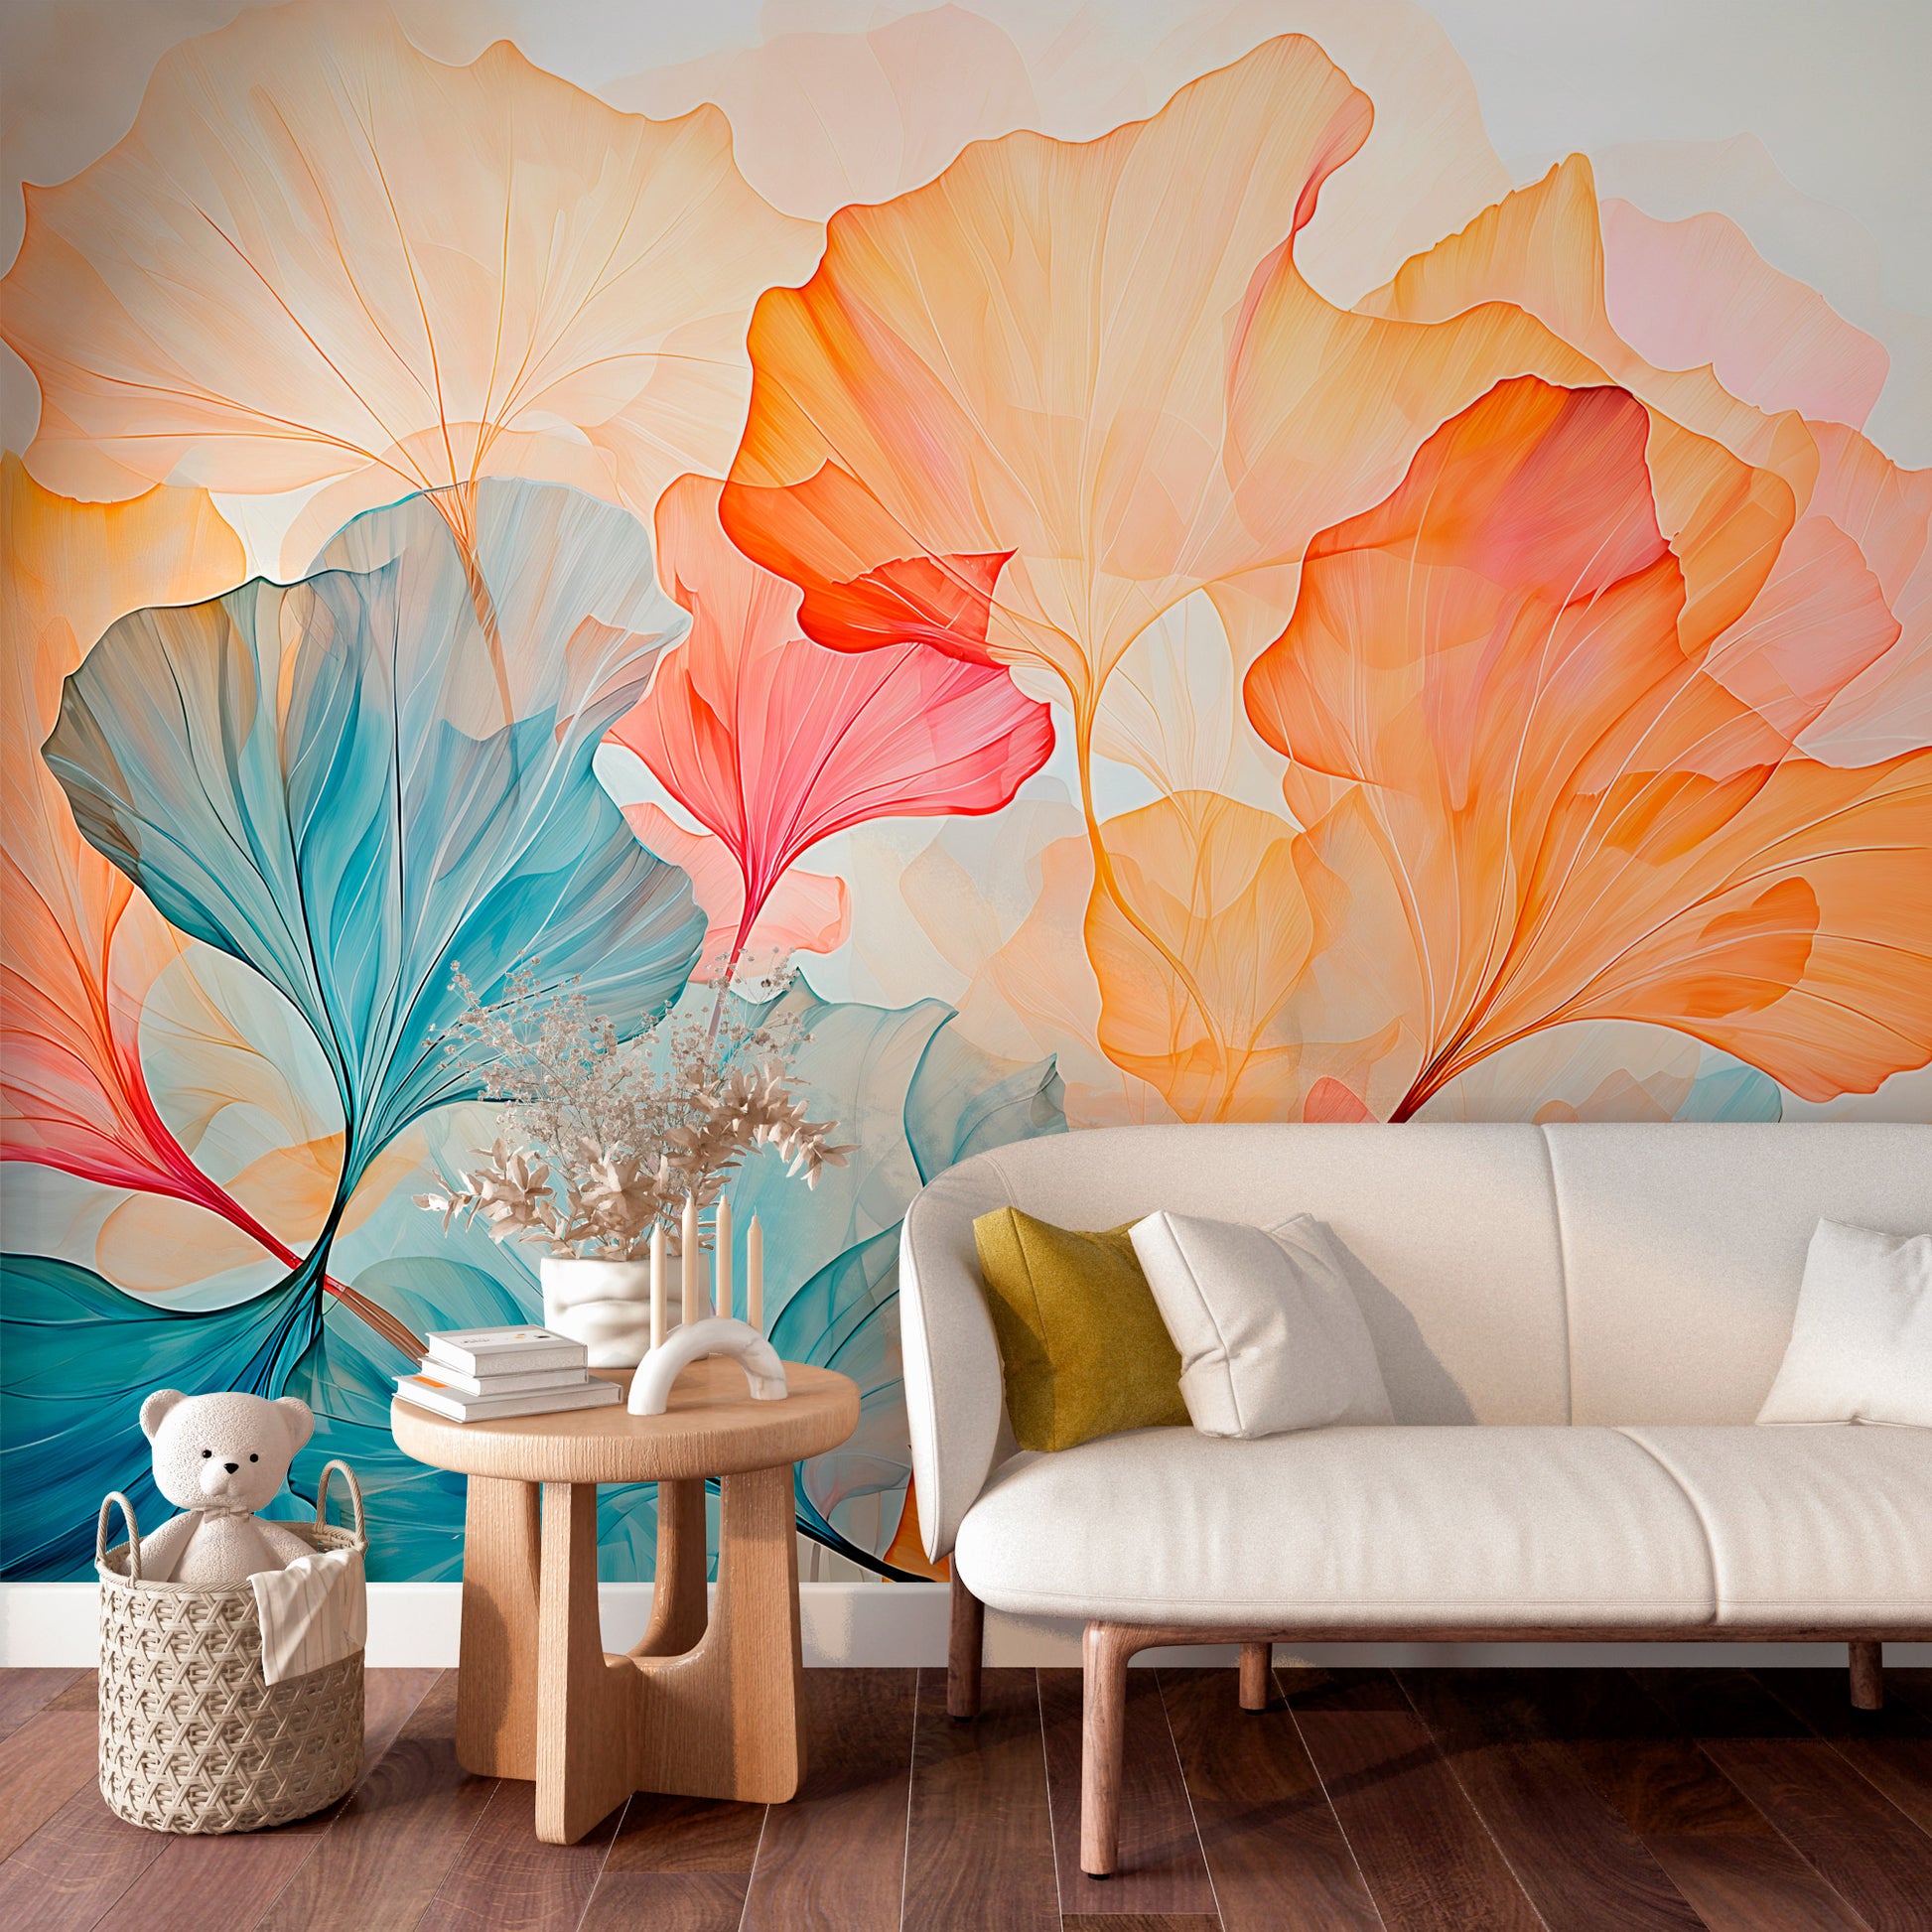 Watercolor Abstractions for Wall Decor